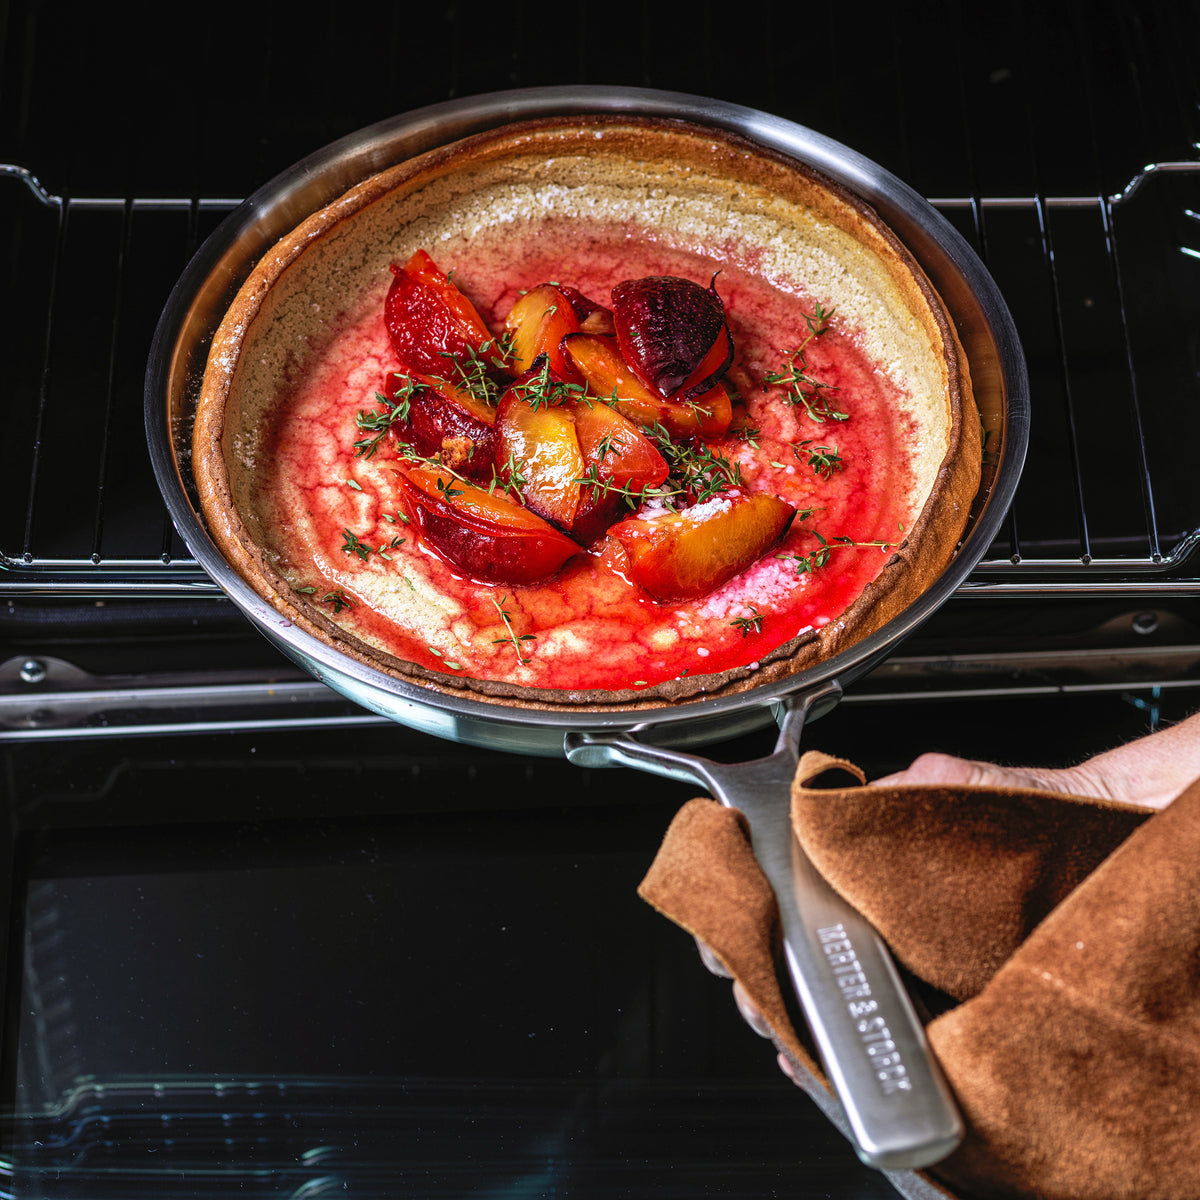 hand holding frypan filled with backed fruit dessert, pulling it out of the oven.